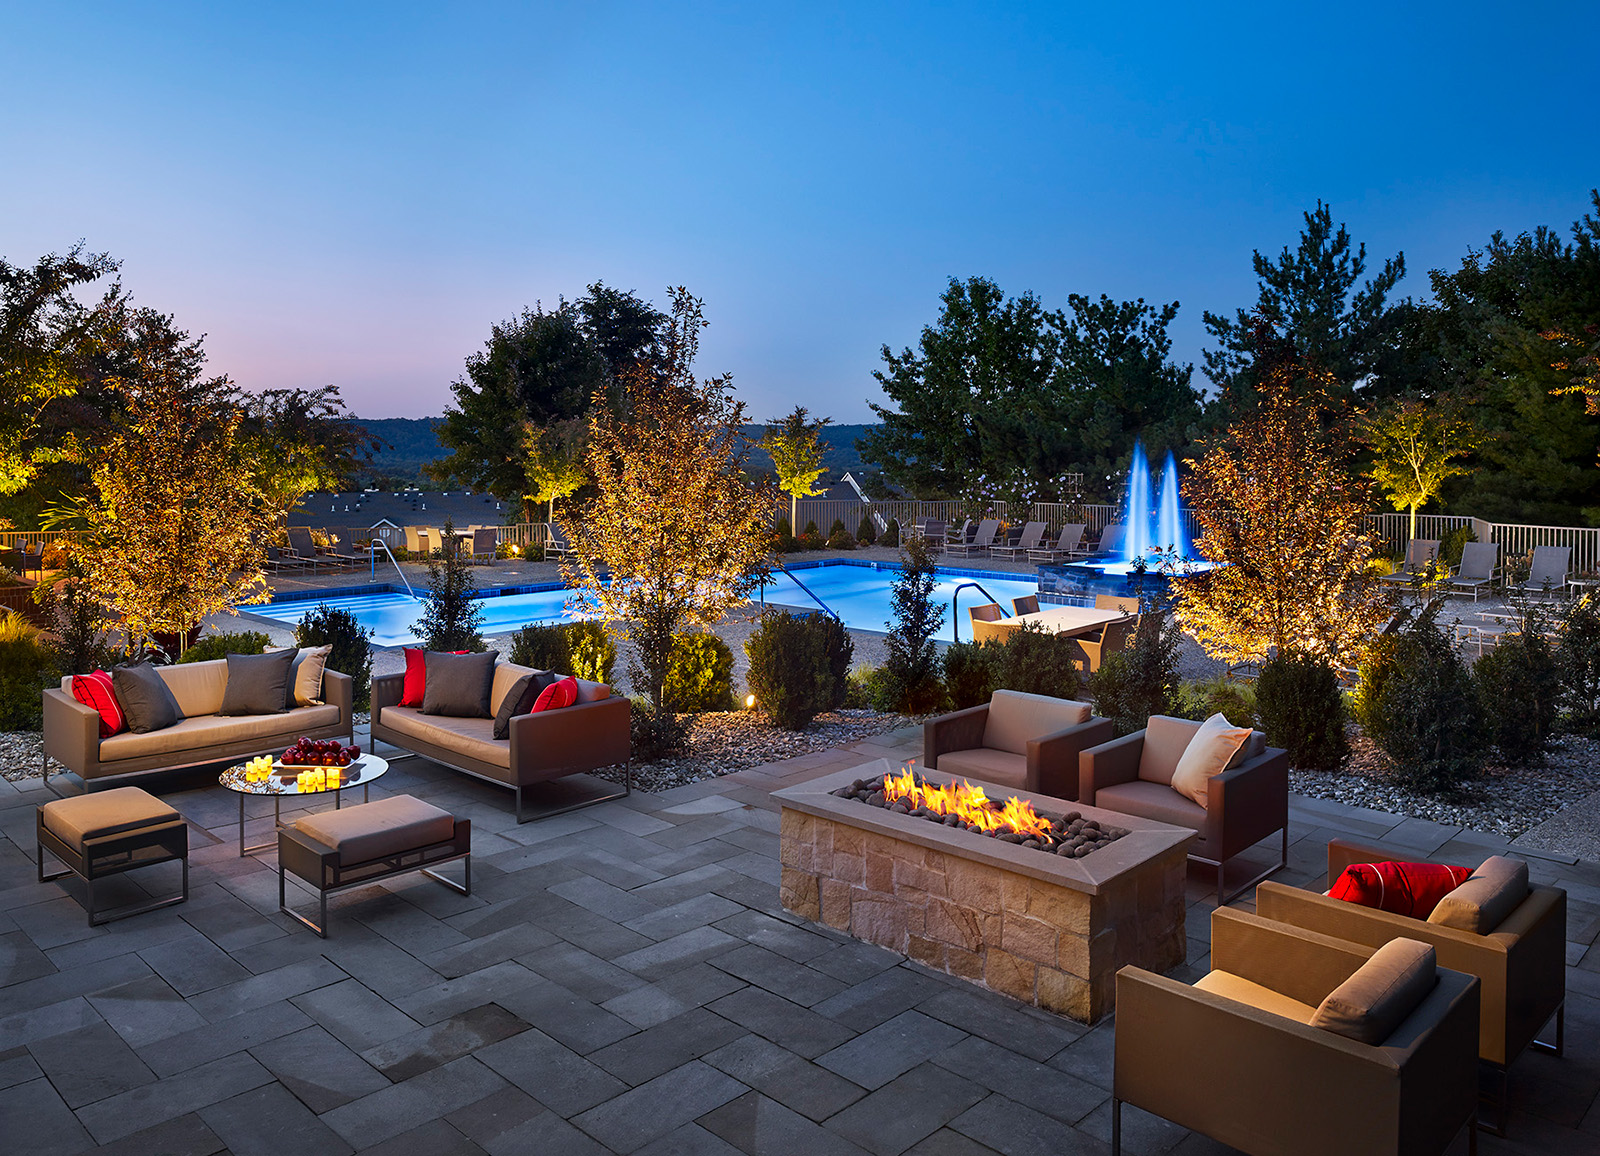 AVE Malvern apartment community at night with firepit and lounge chairs in front of pool